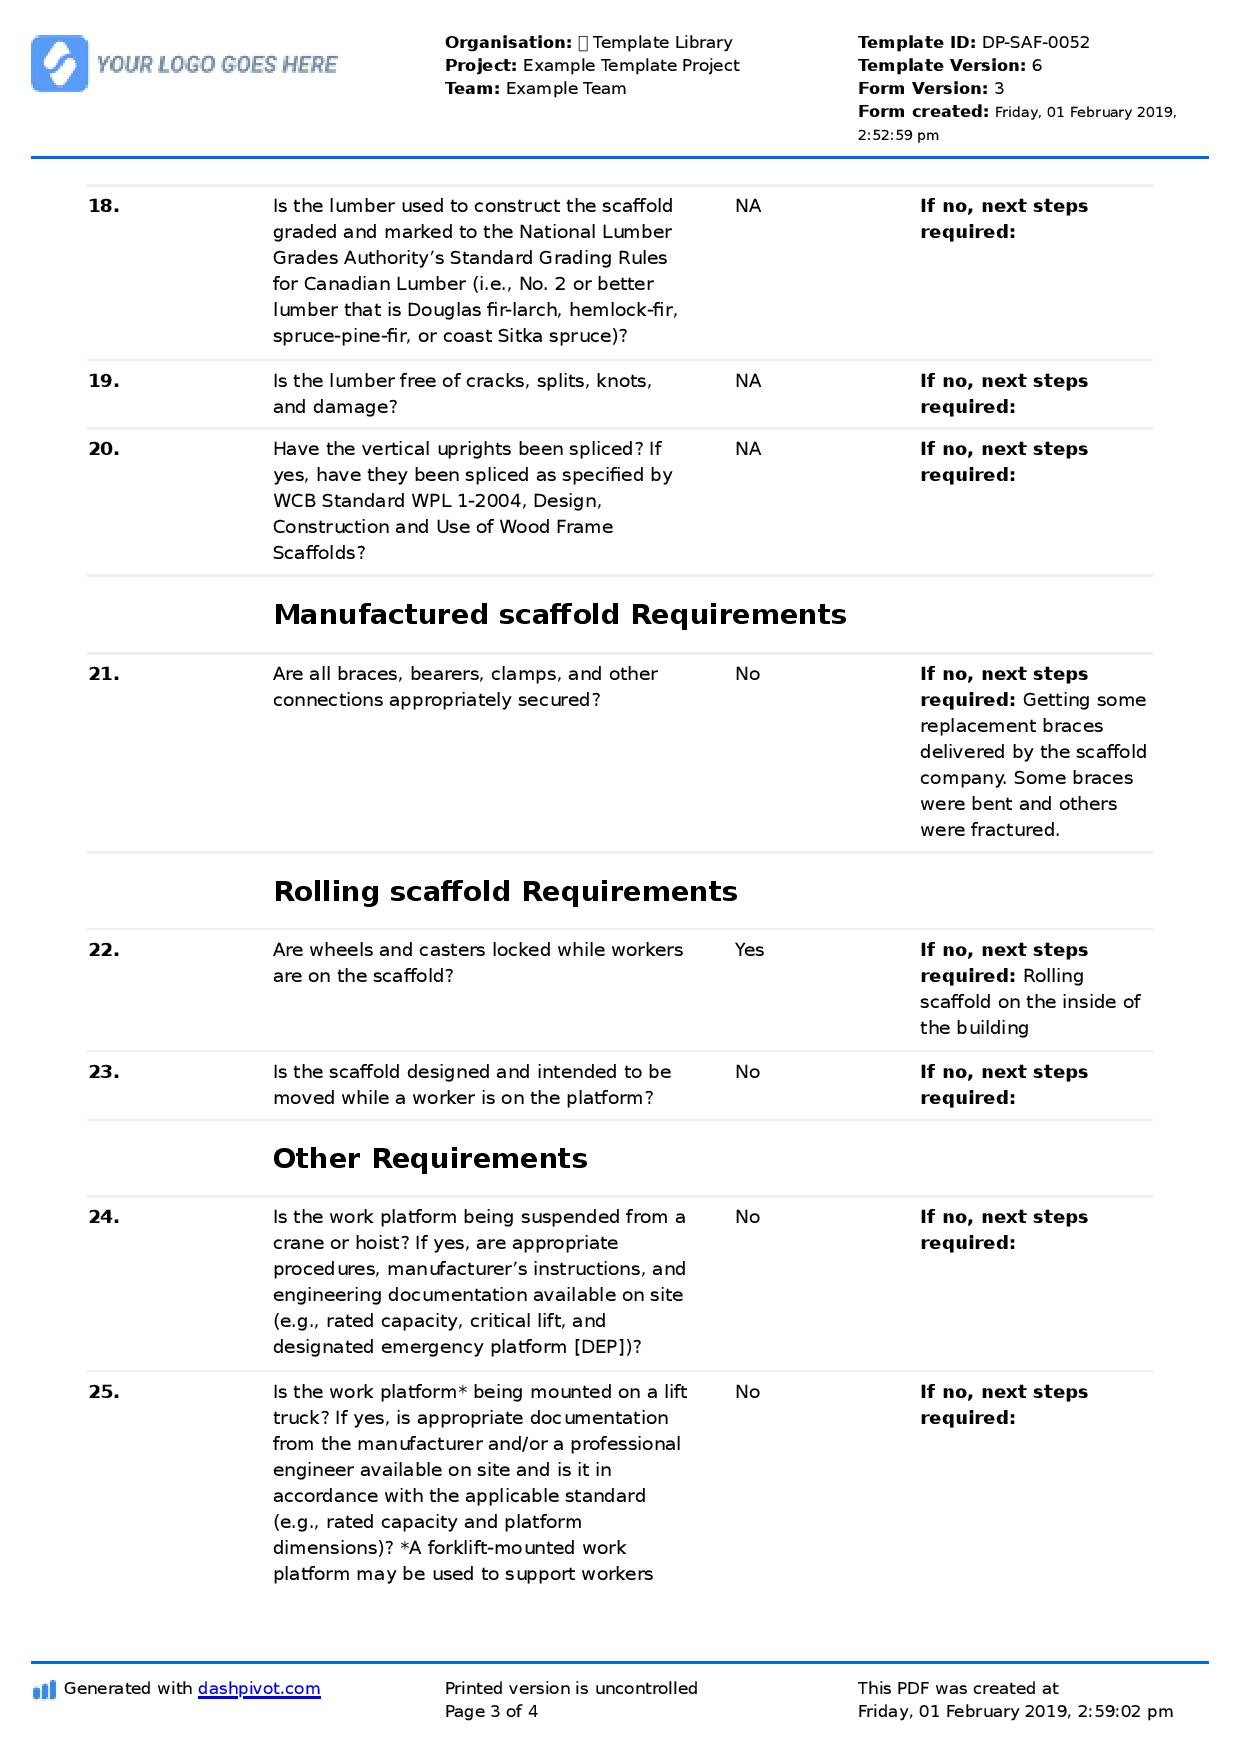 Scaffold Inspection Checklist Free Template (daily Or Weekly  Within Scaffold Inspection Checklist Free Template